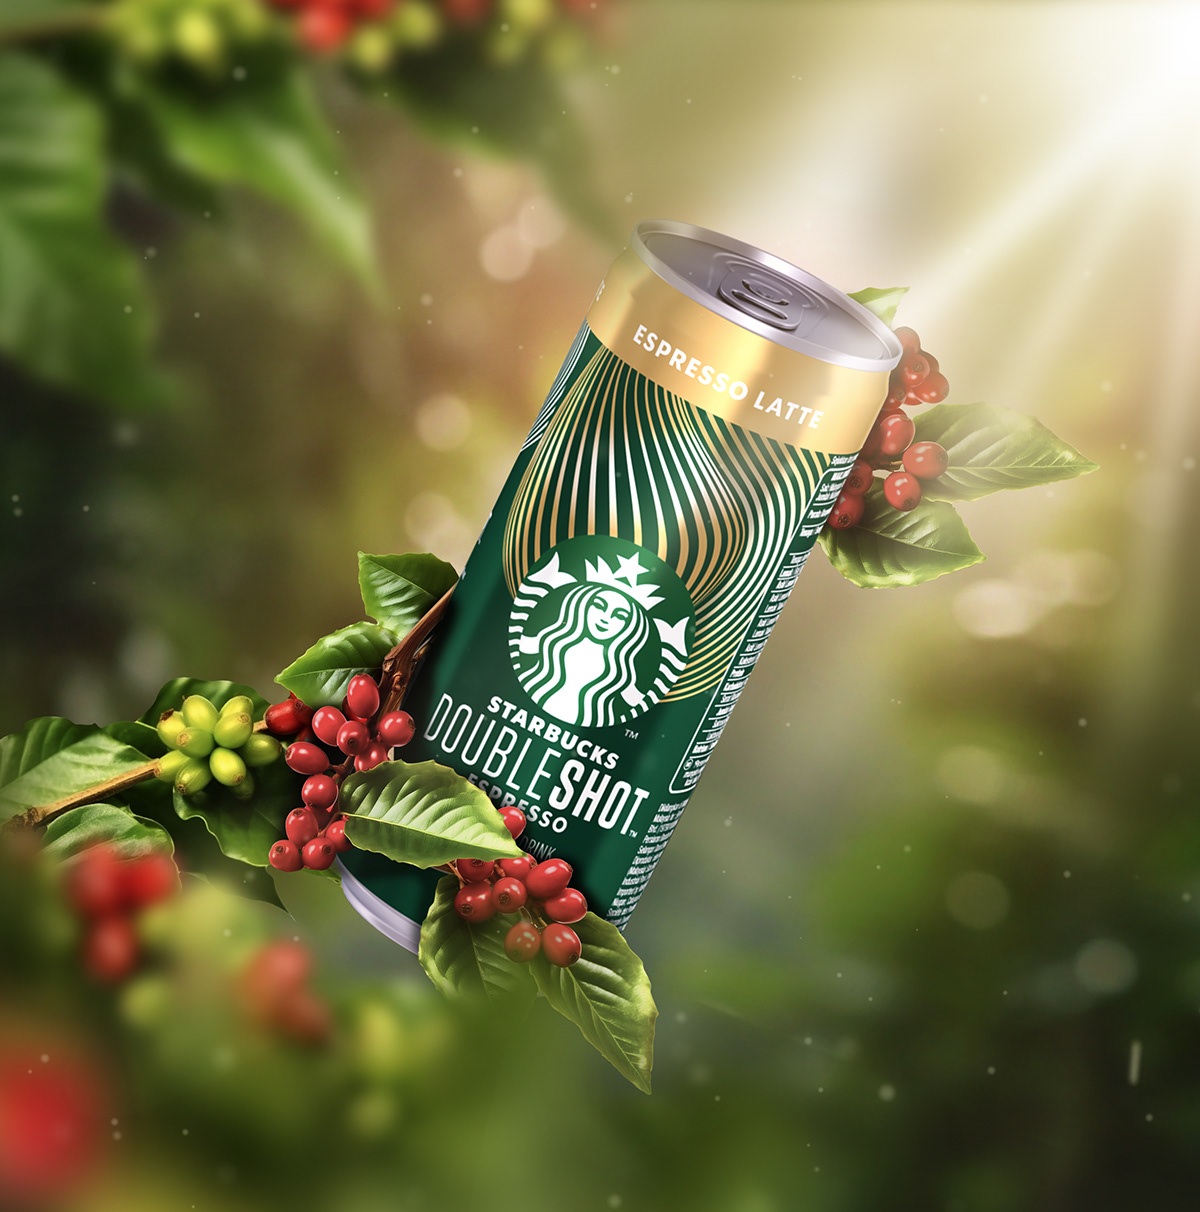 starbucks Coffee cafe Packaging Social media post Socialmedia food photography brand identity beverage cans